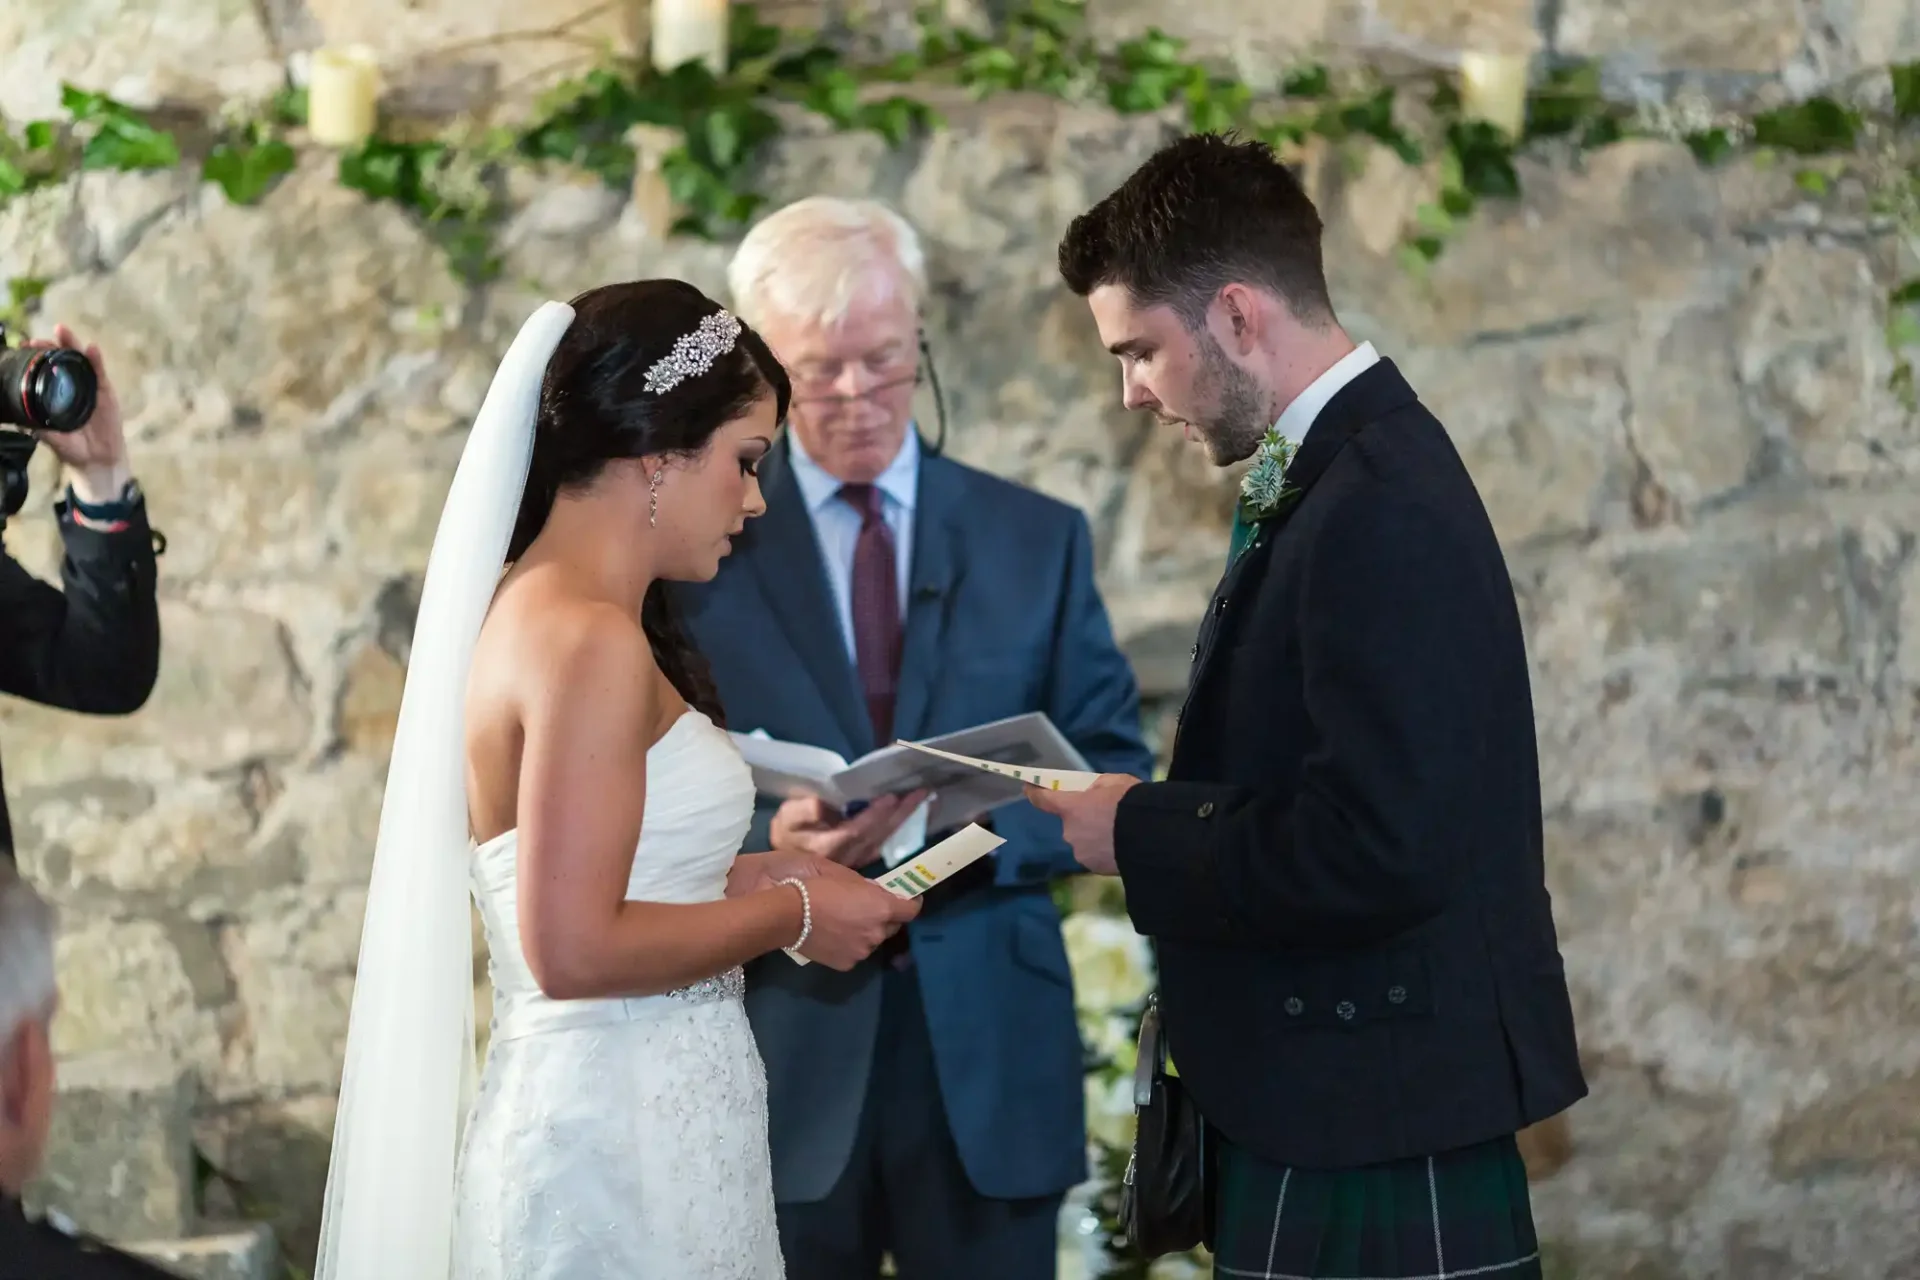 A bride and groom exchange vows, with the groom in a kilt, while an officiant watches and a photographer captures the moment in a rustic venue.